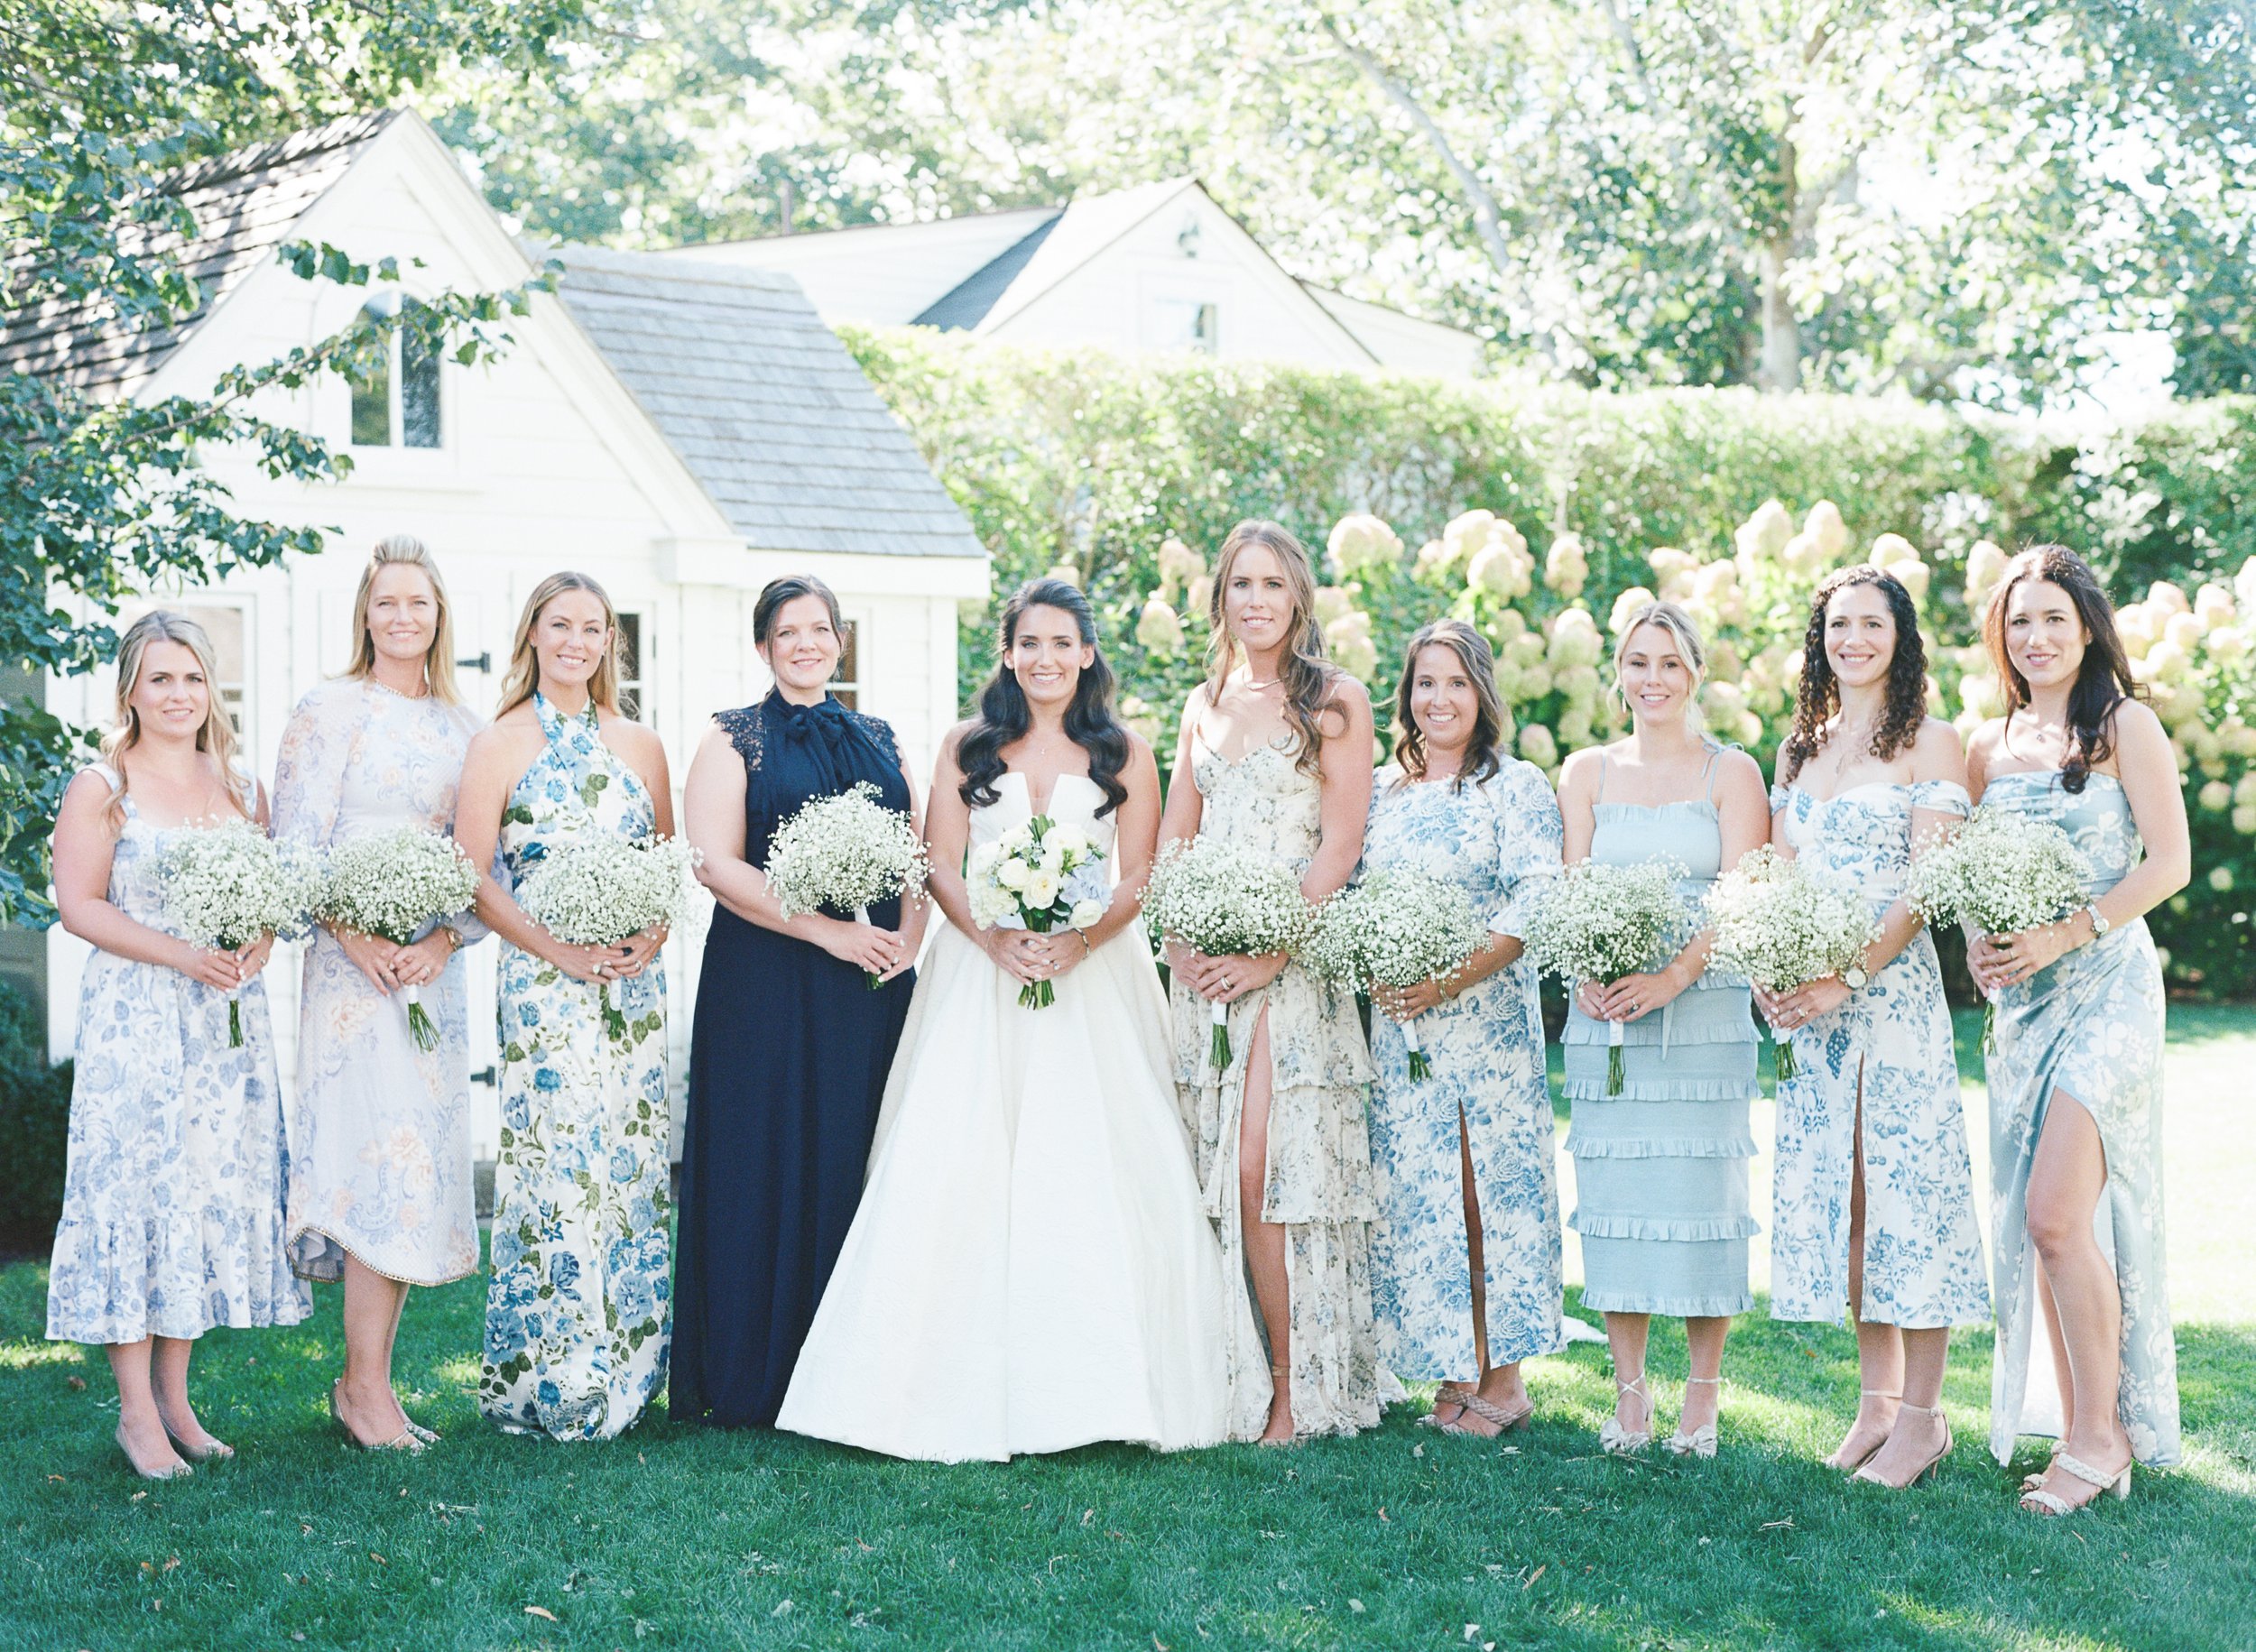 Blue and White Bridal Party Dress in Martha's Vineyard